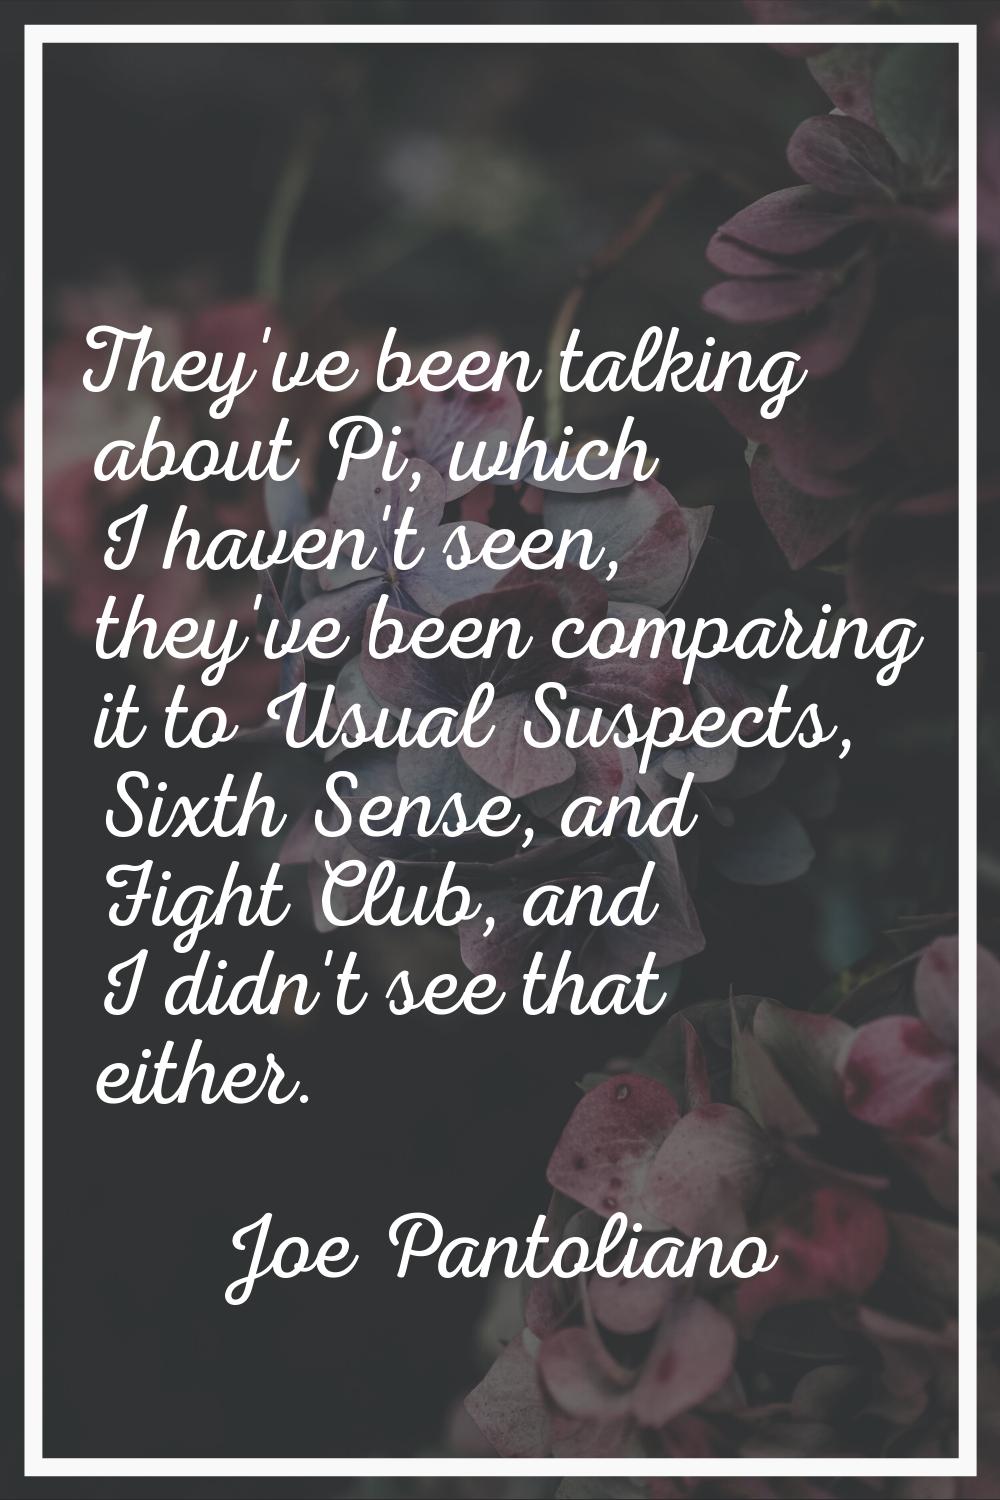 They've been talking about Pi, which I haven't seen, they've been comparing it to Usual Suspects, S